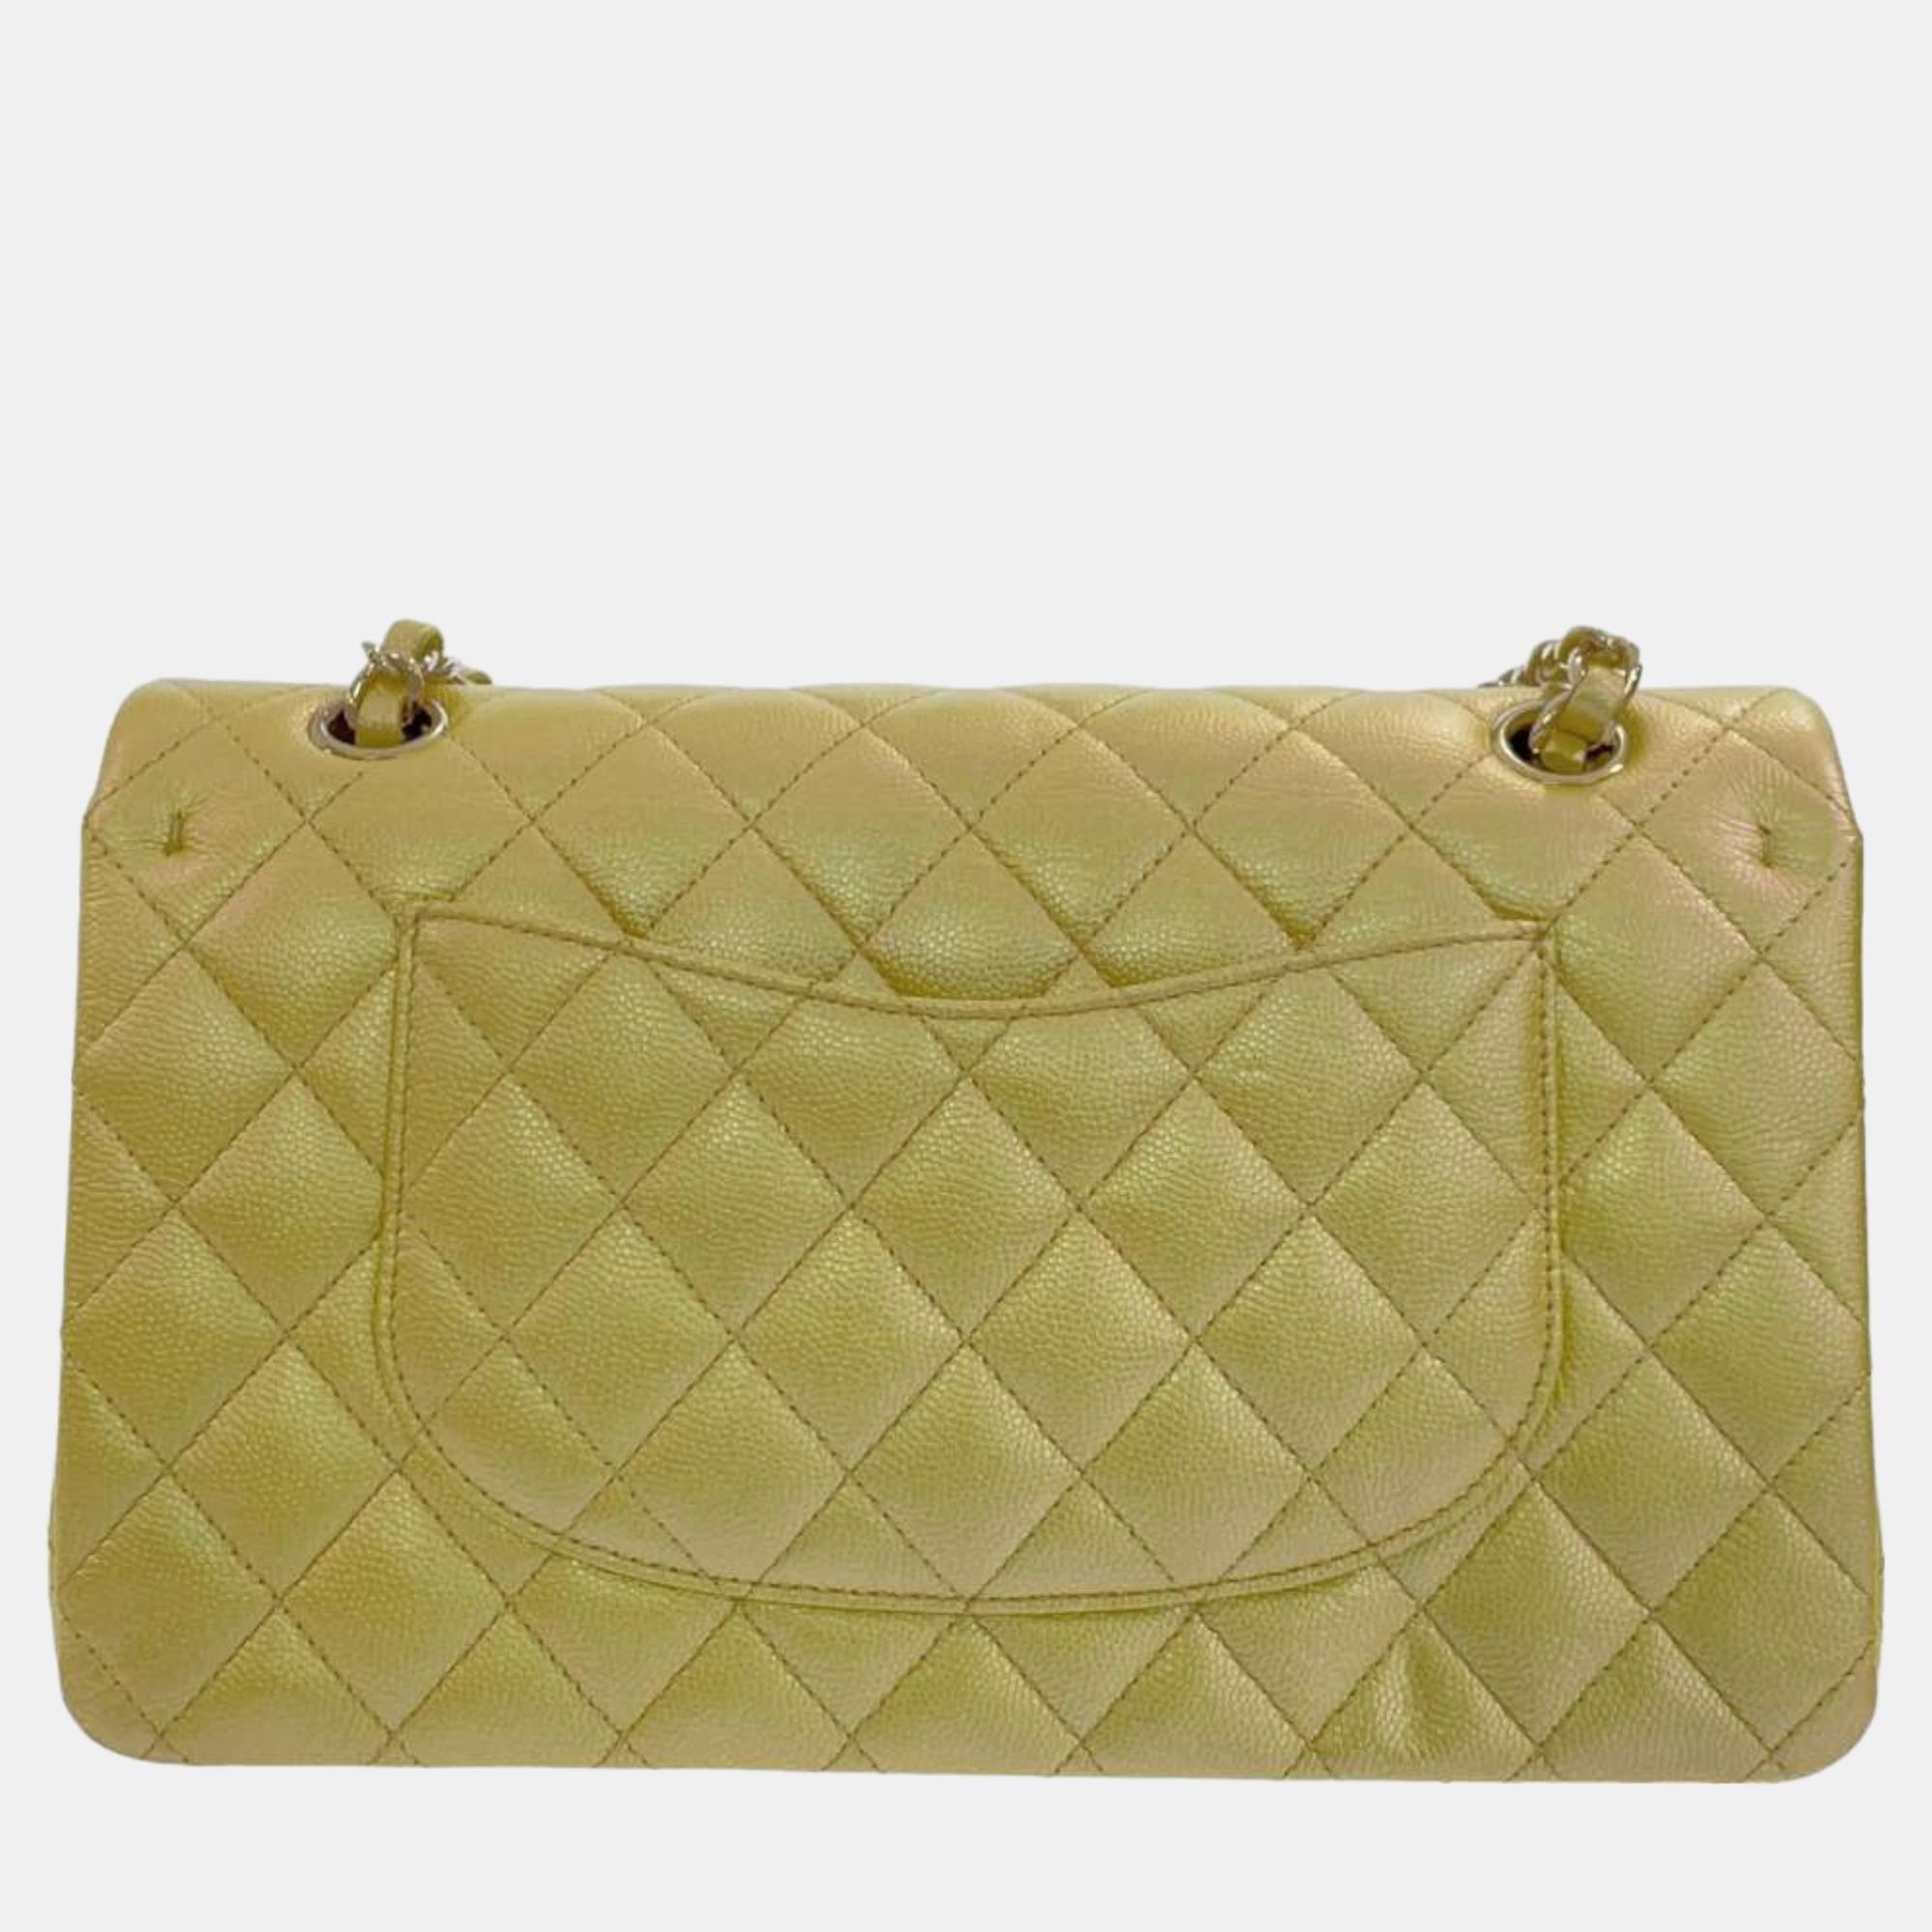 Chanel Yellow Leather Classic Double Flap Shoulder Bag